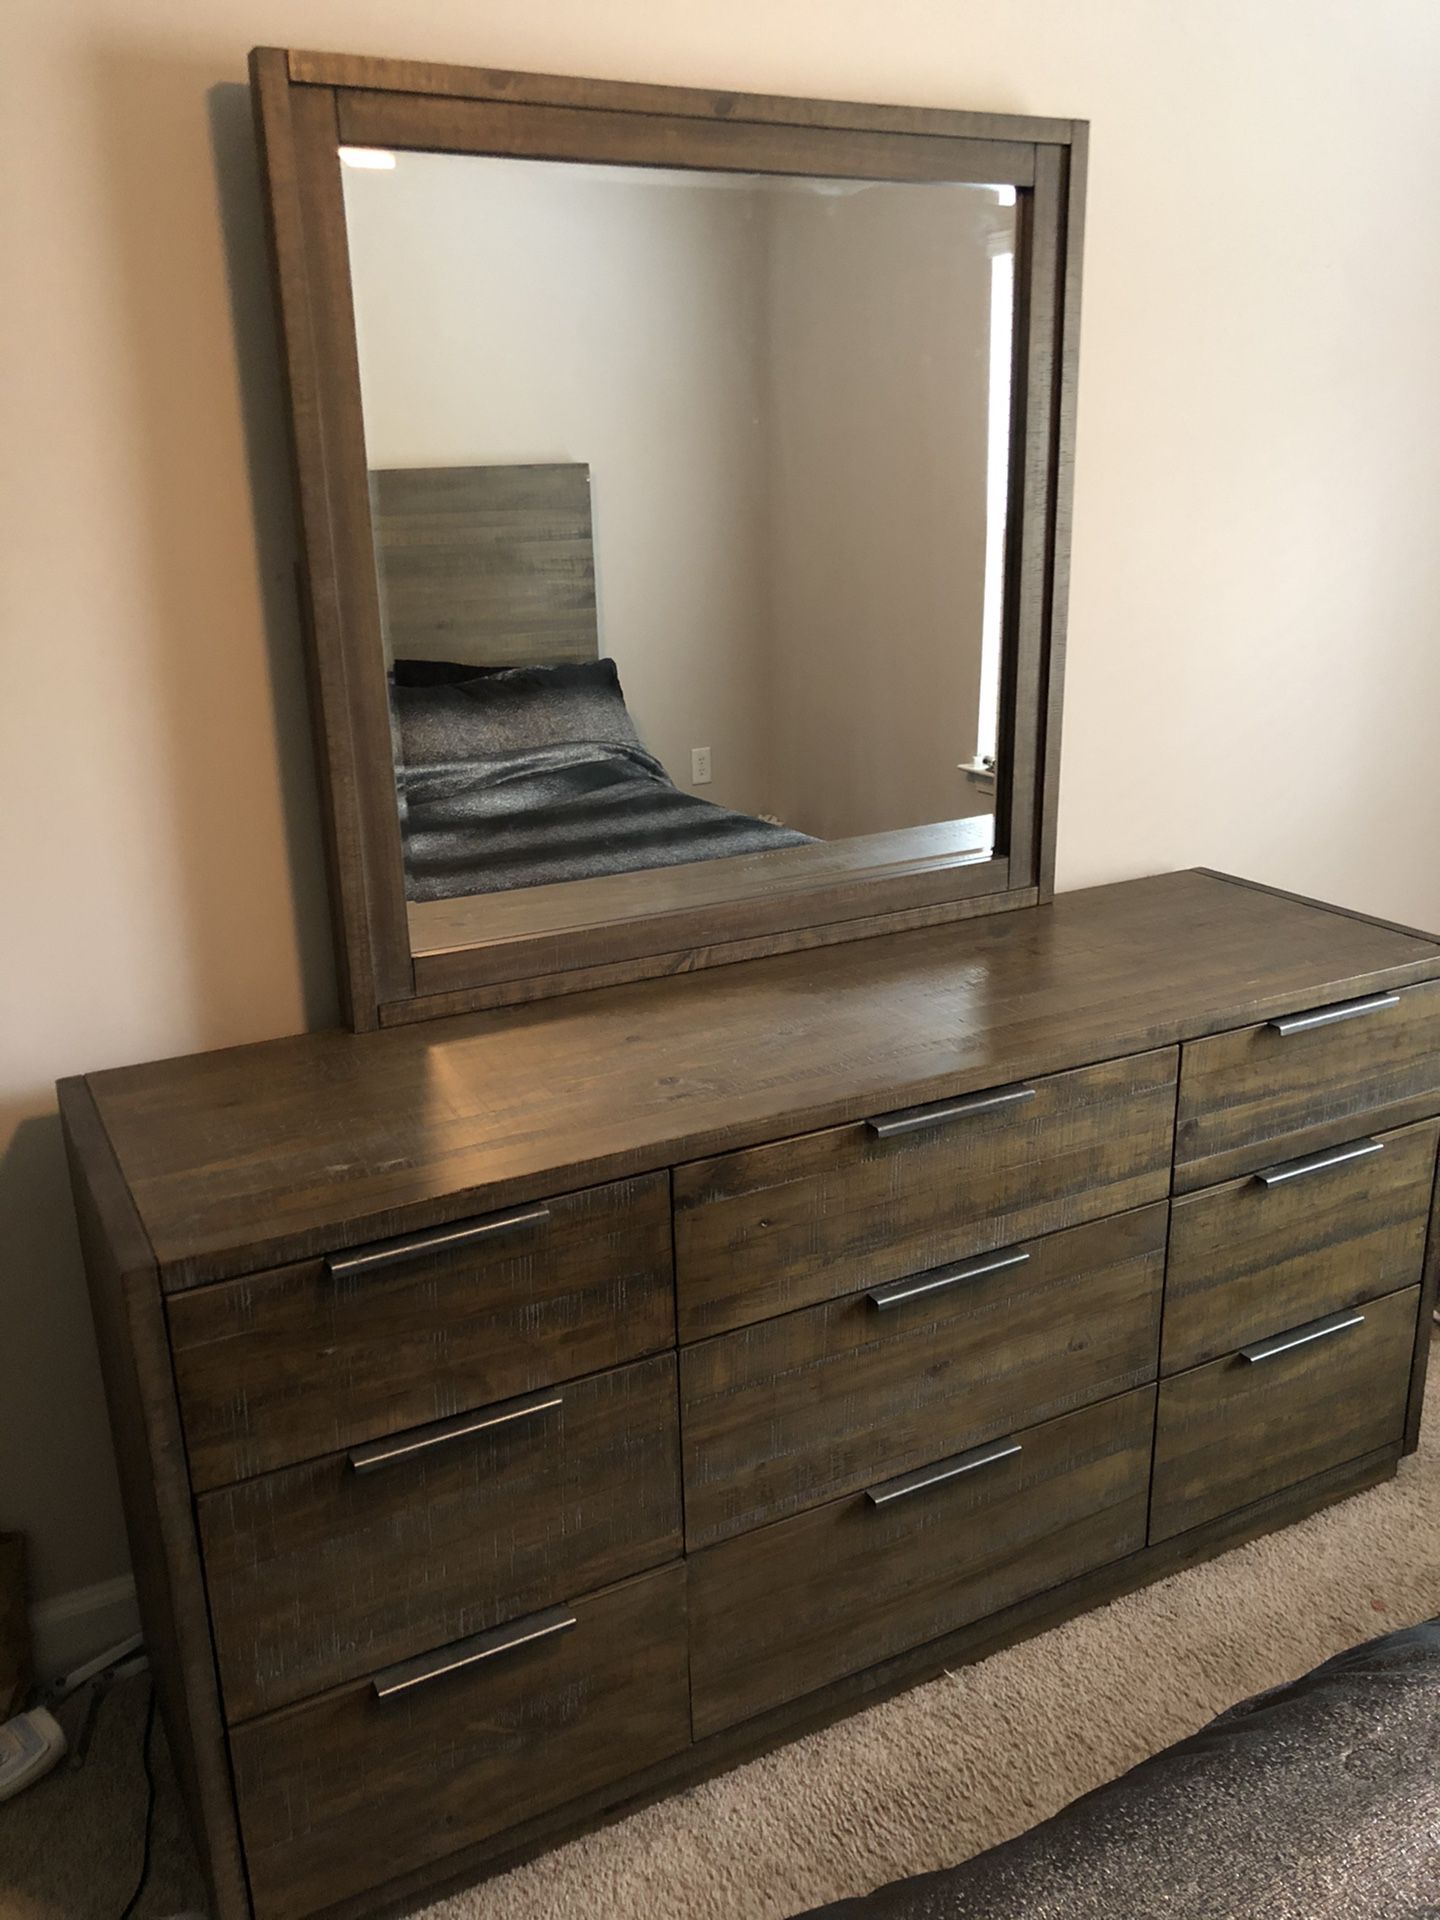 Dresser for sale!!! Comes with mirror